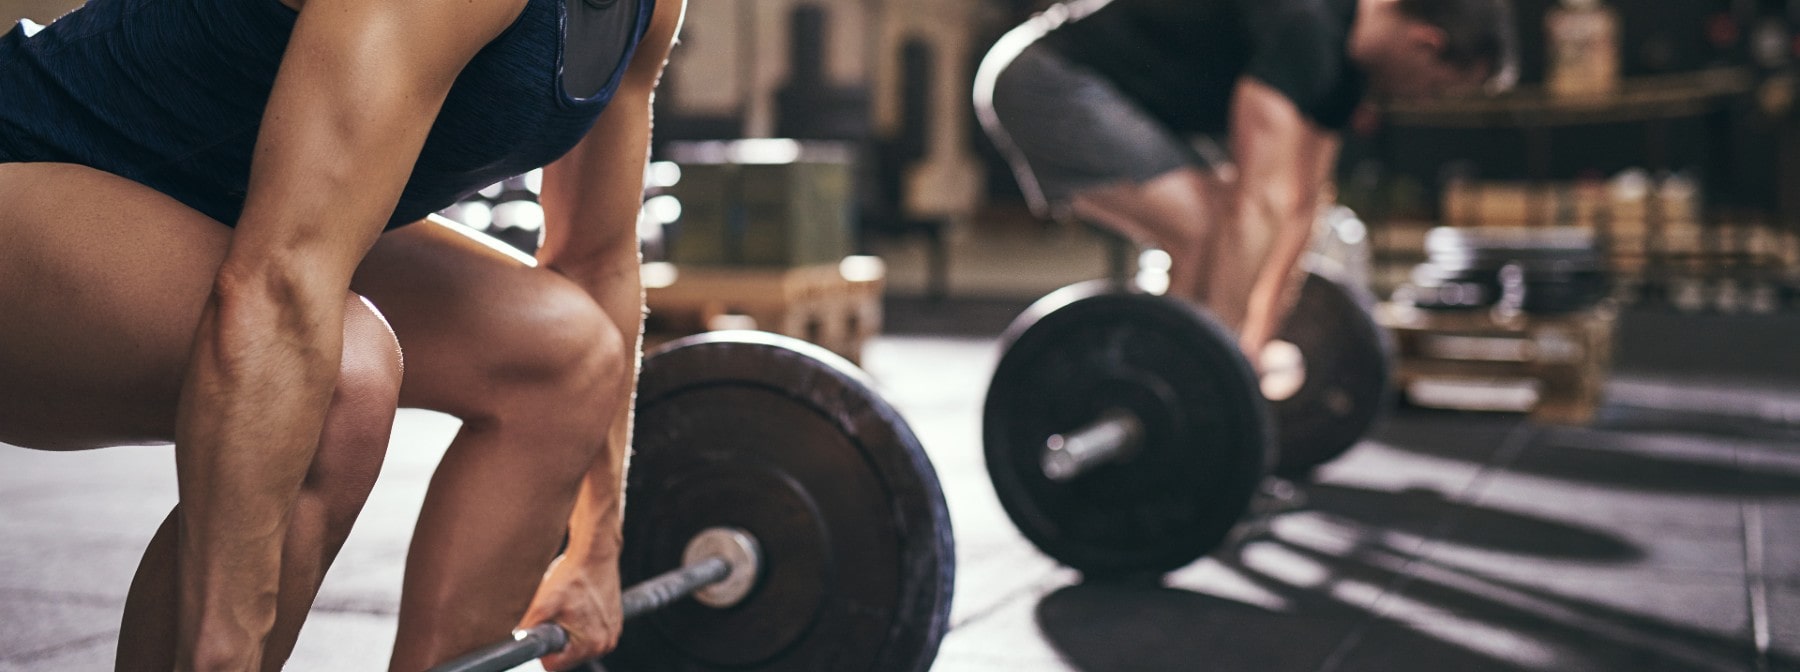 How to Improve your Deadlift | Our Top Tips